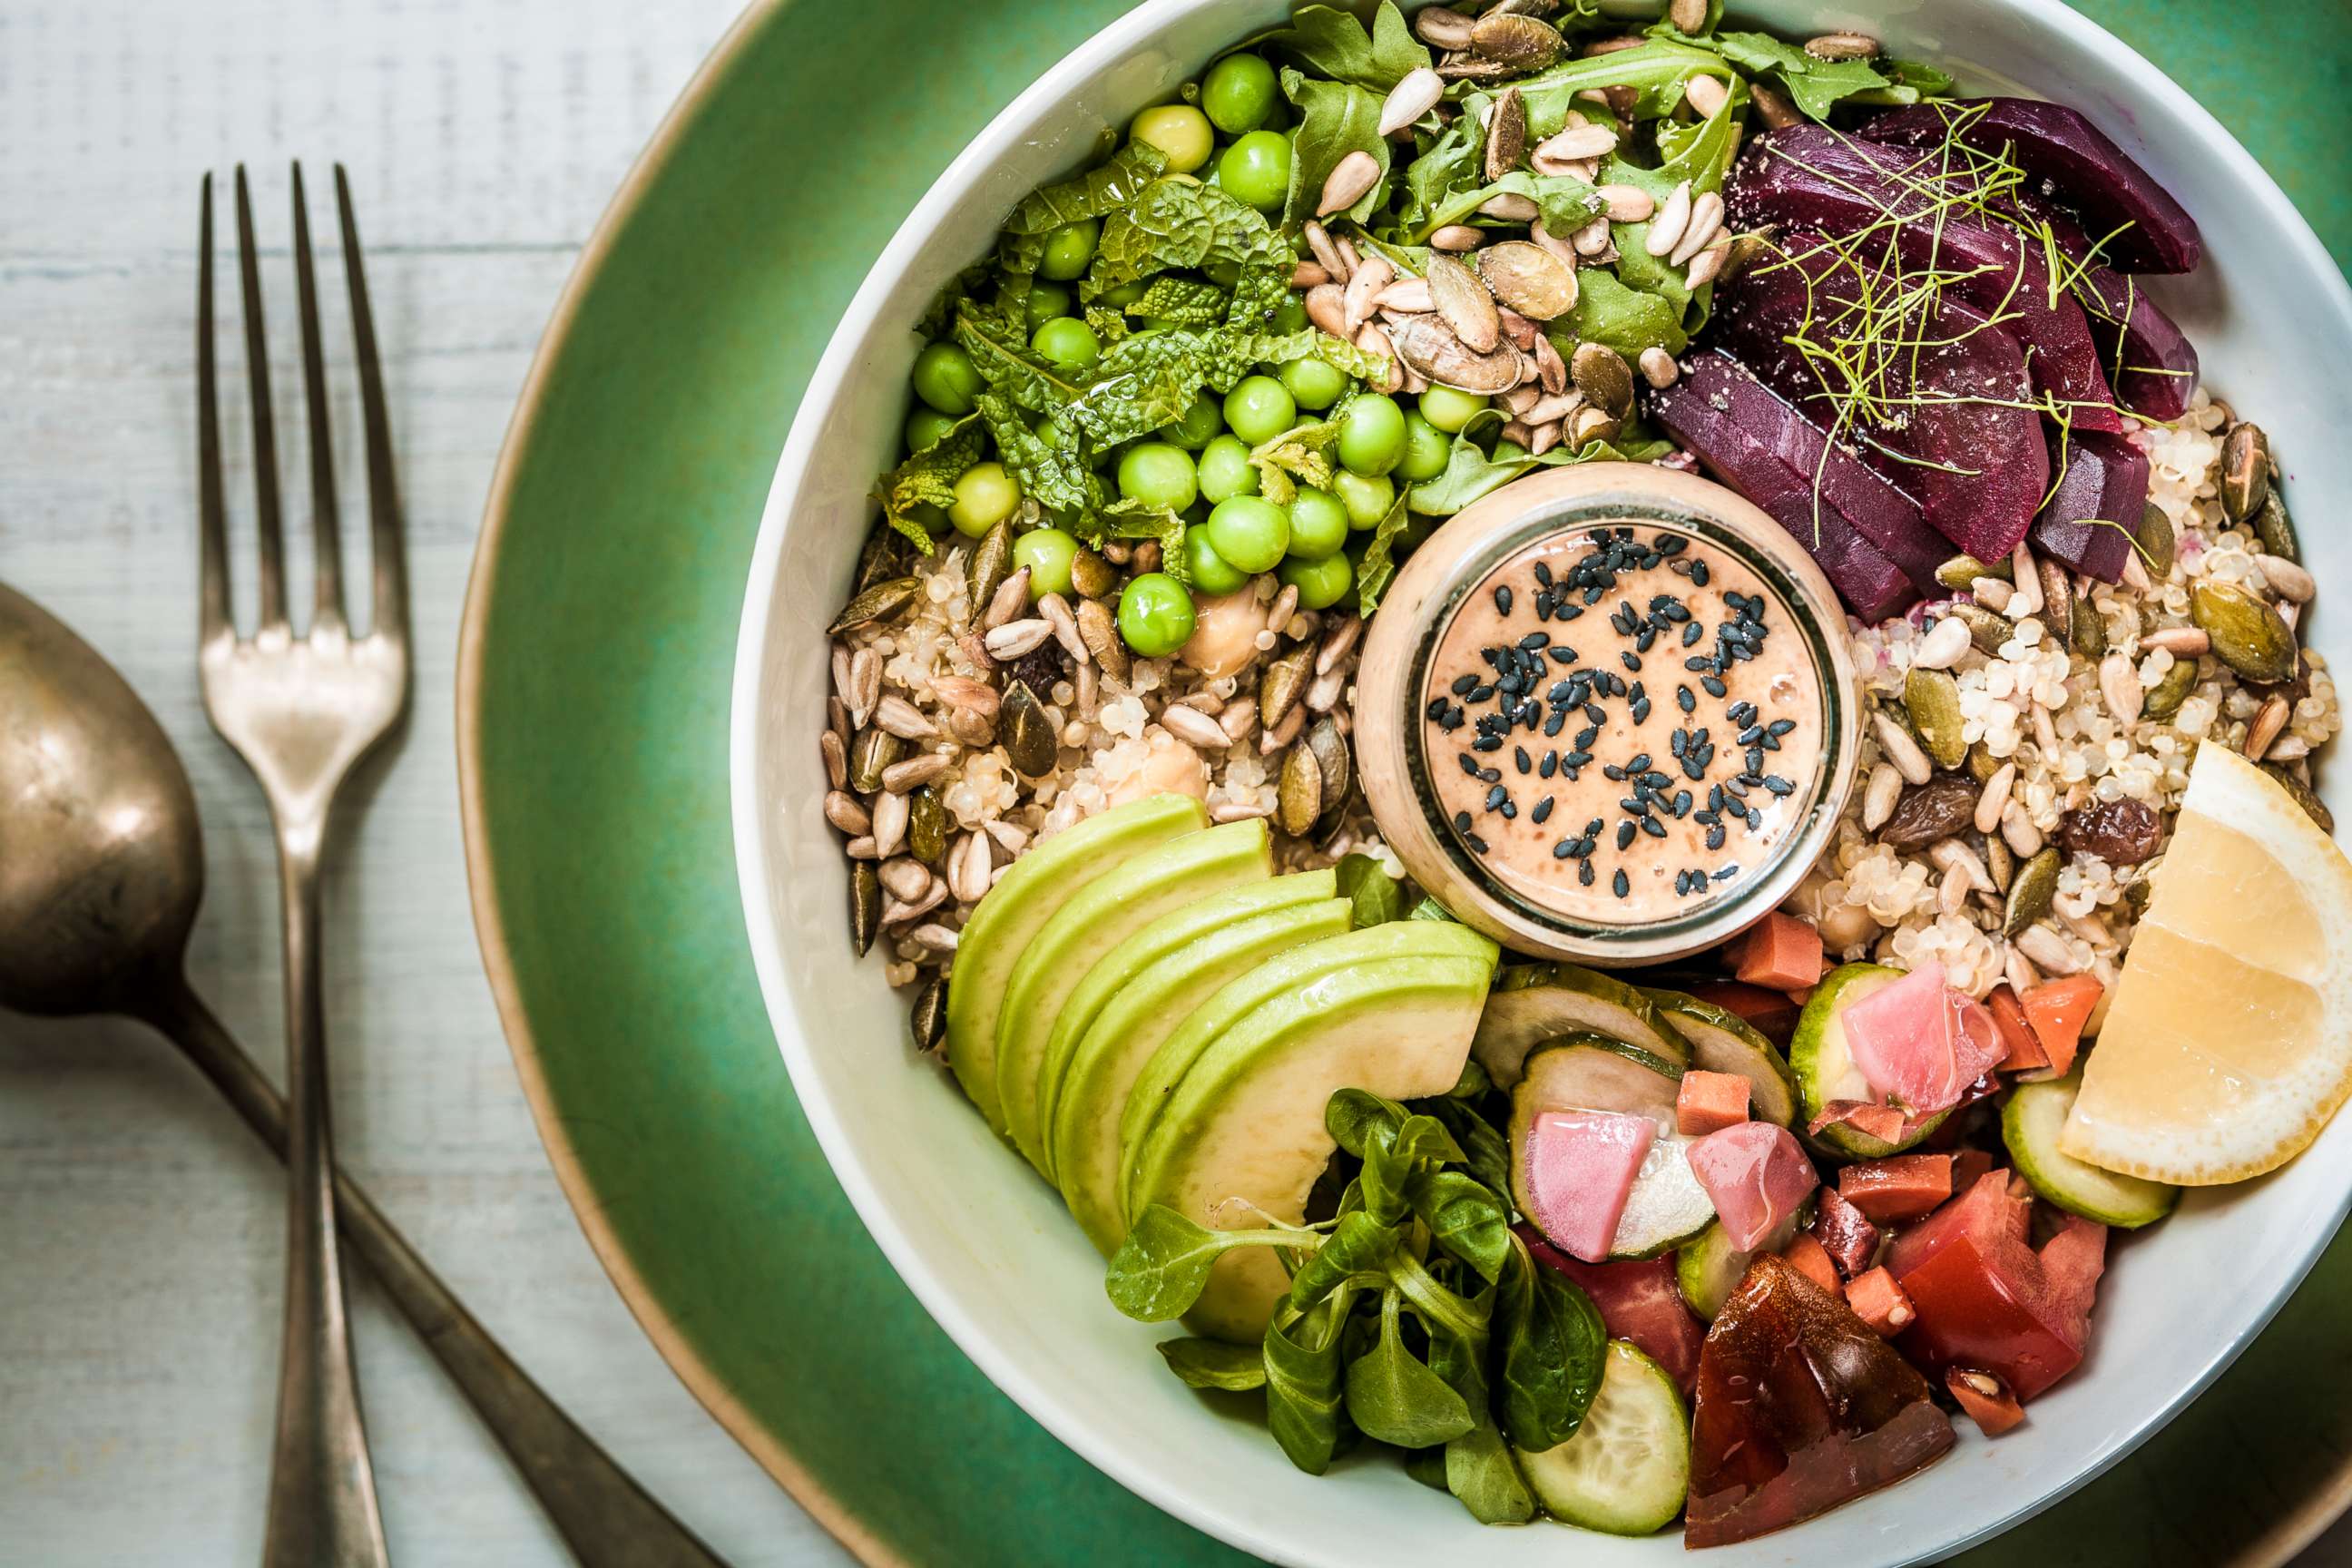 PHOTO: A vegan lunch bowl containing leafy greens, grains, seeds, vegetables, avocado and a peanut-miso sauce.